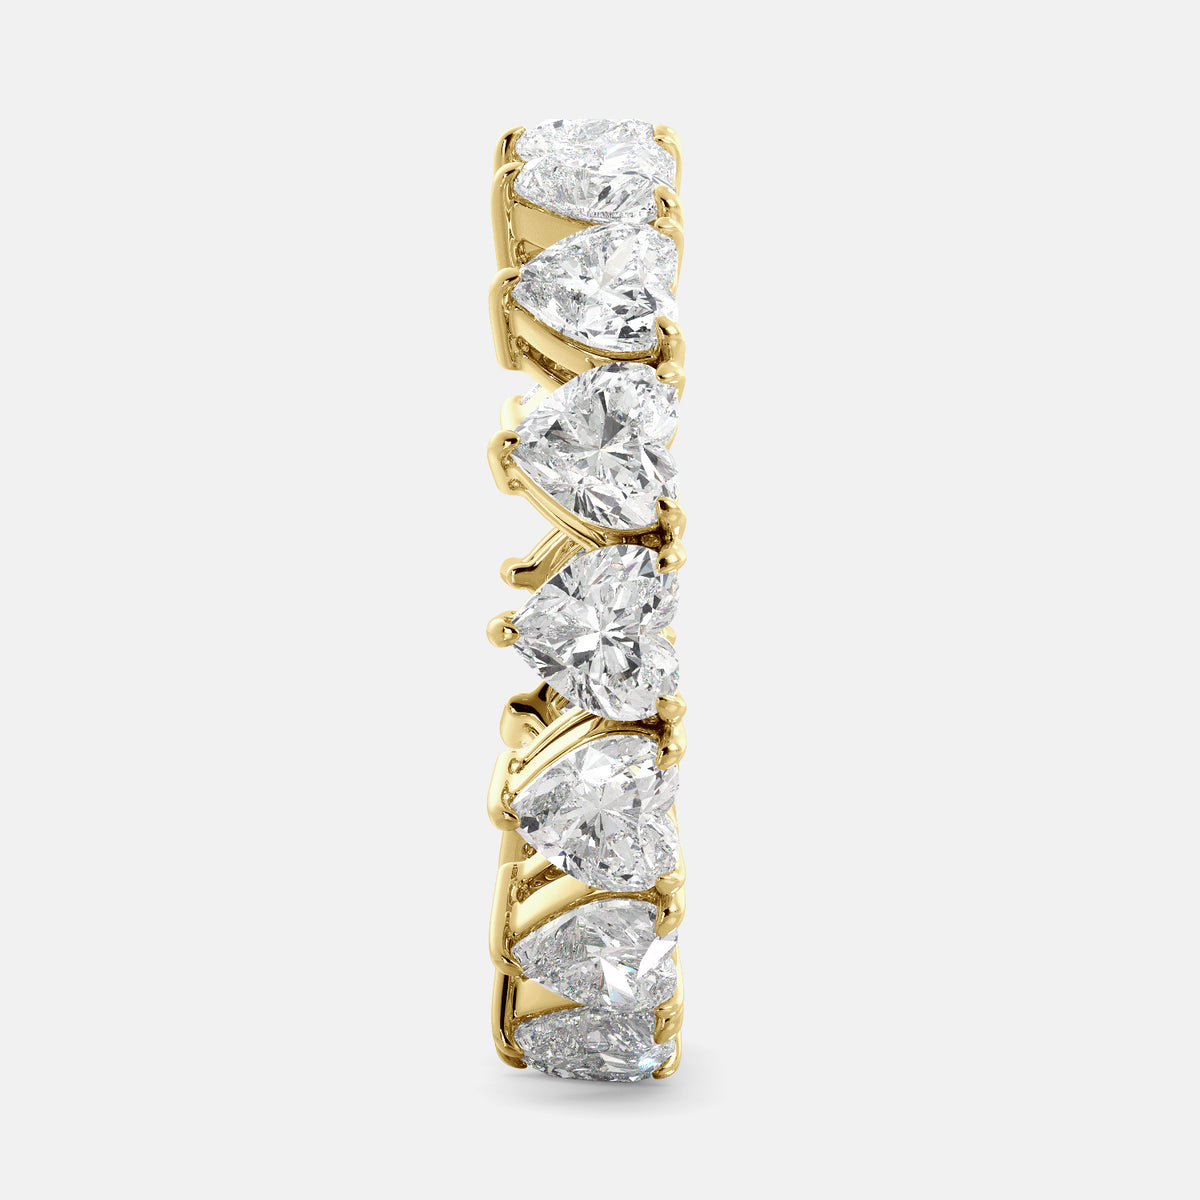 A close-up of a heart-shaped lab-grown diamond eternity wedding band in 14K yellow gold. The band is set with heart shape brilliant diamonds that sparkle and shine. The band is a beautiful and unique choice for a wedding band.